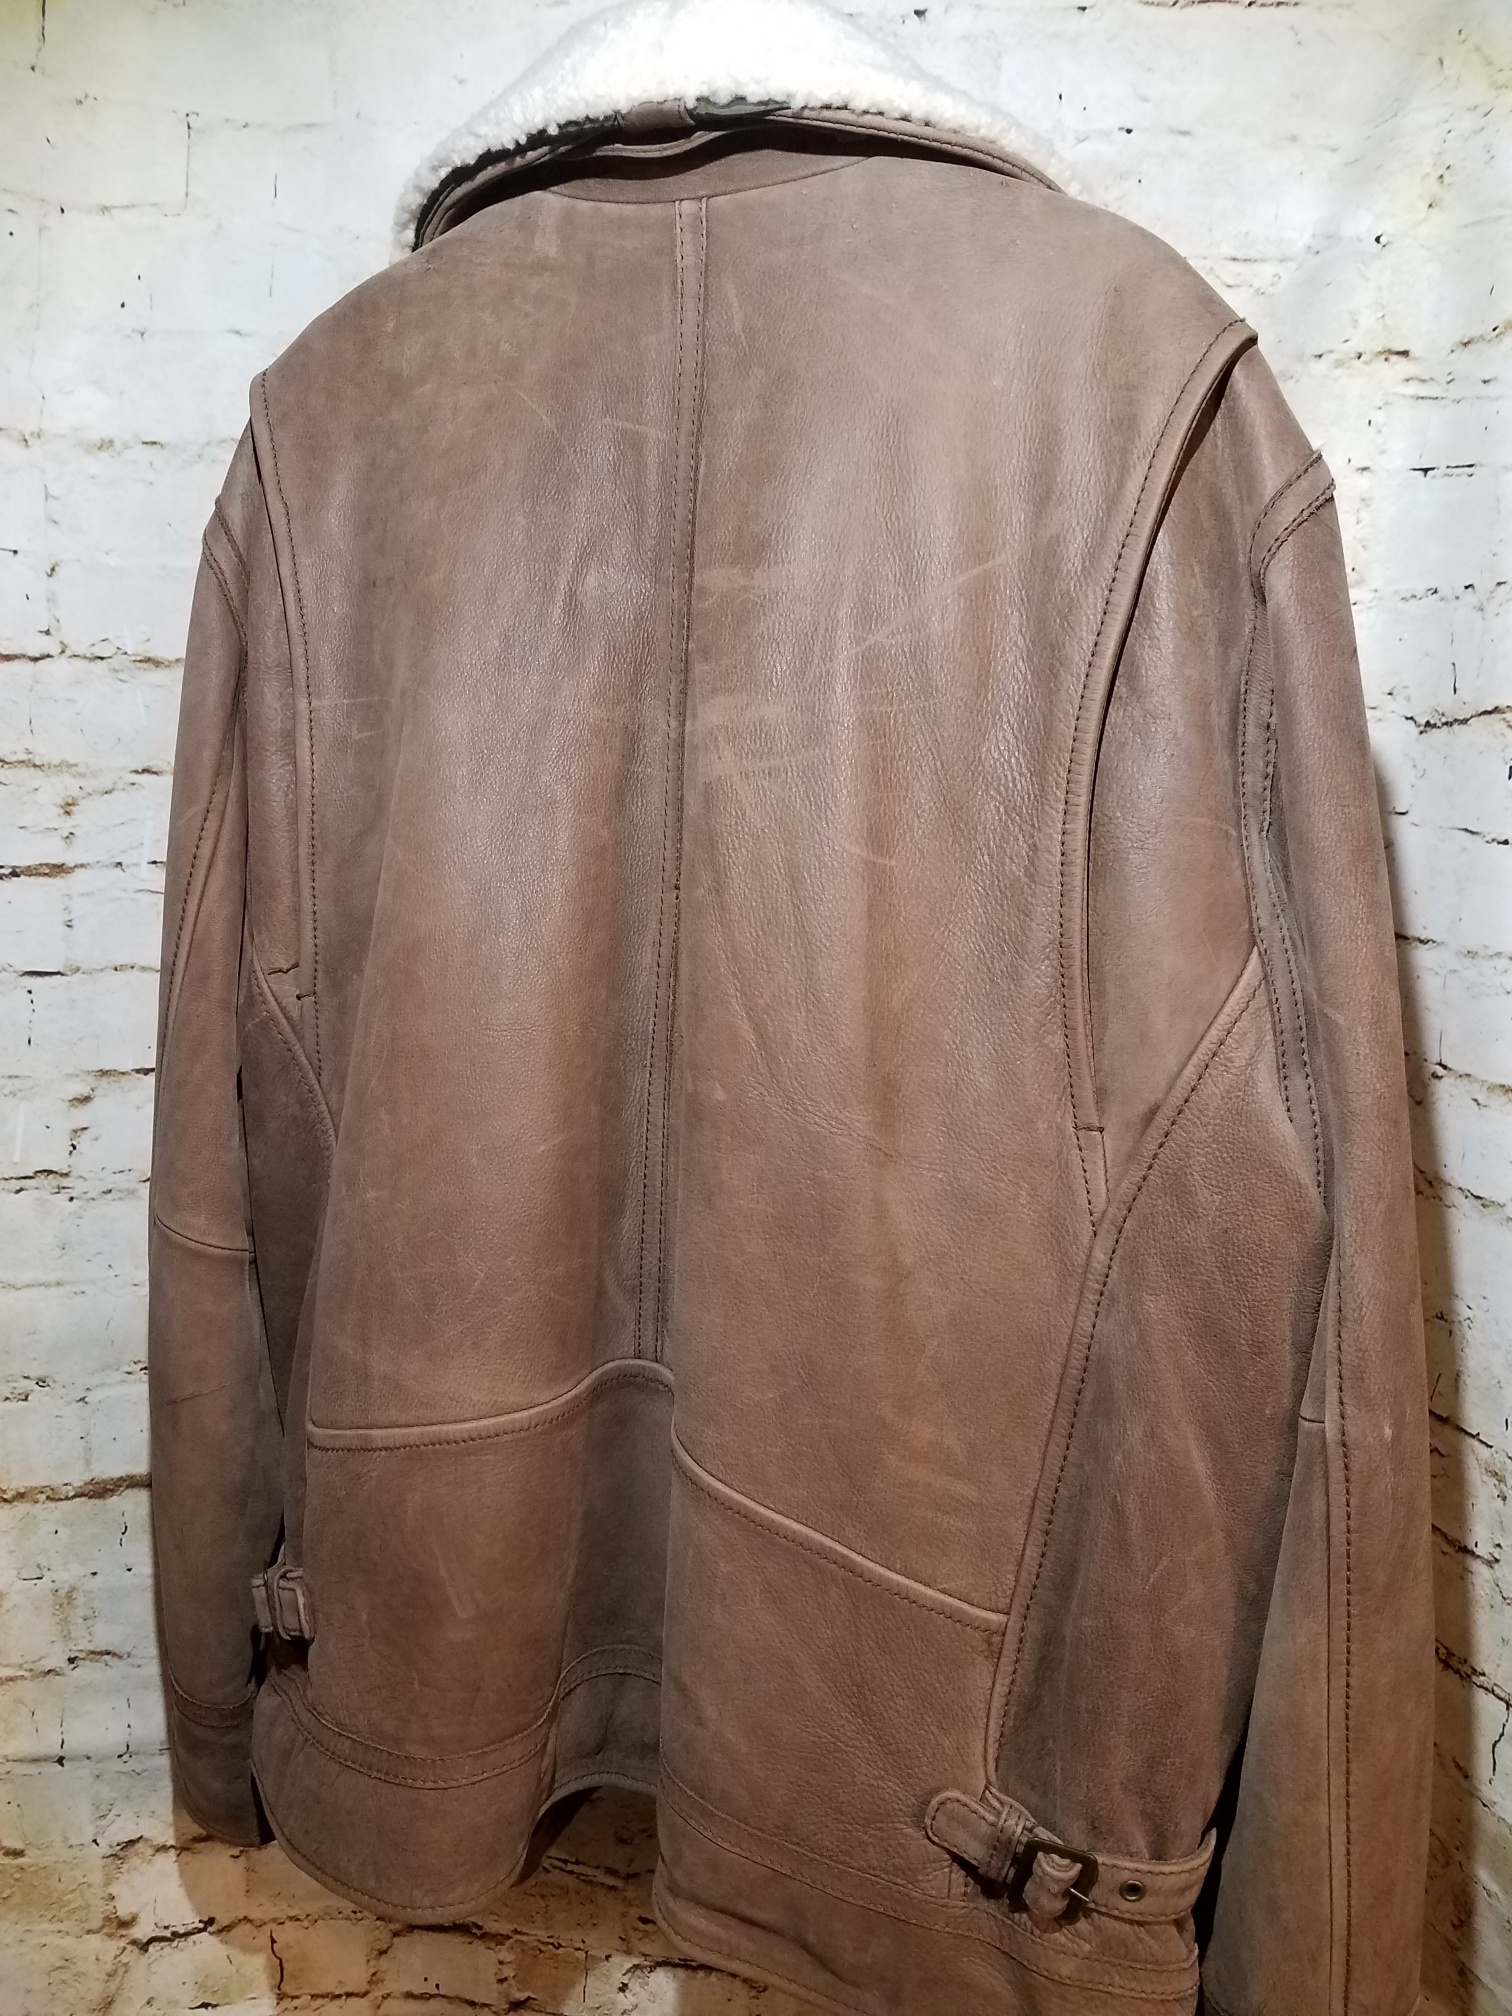 EDDIE BAUER: LEATHER AVIATOR JACKET WITH SHEARLING COLLAR: TIMELESS ...